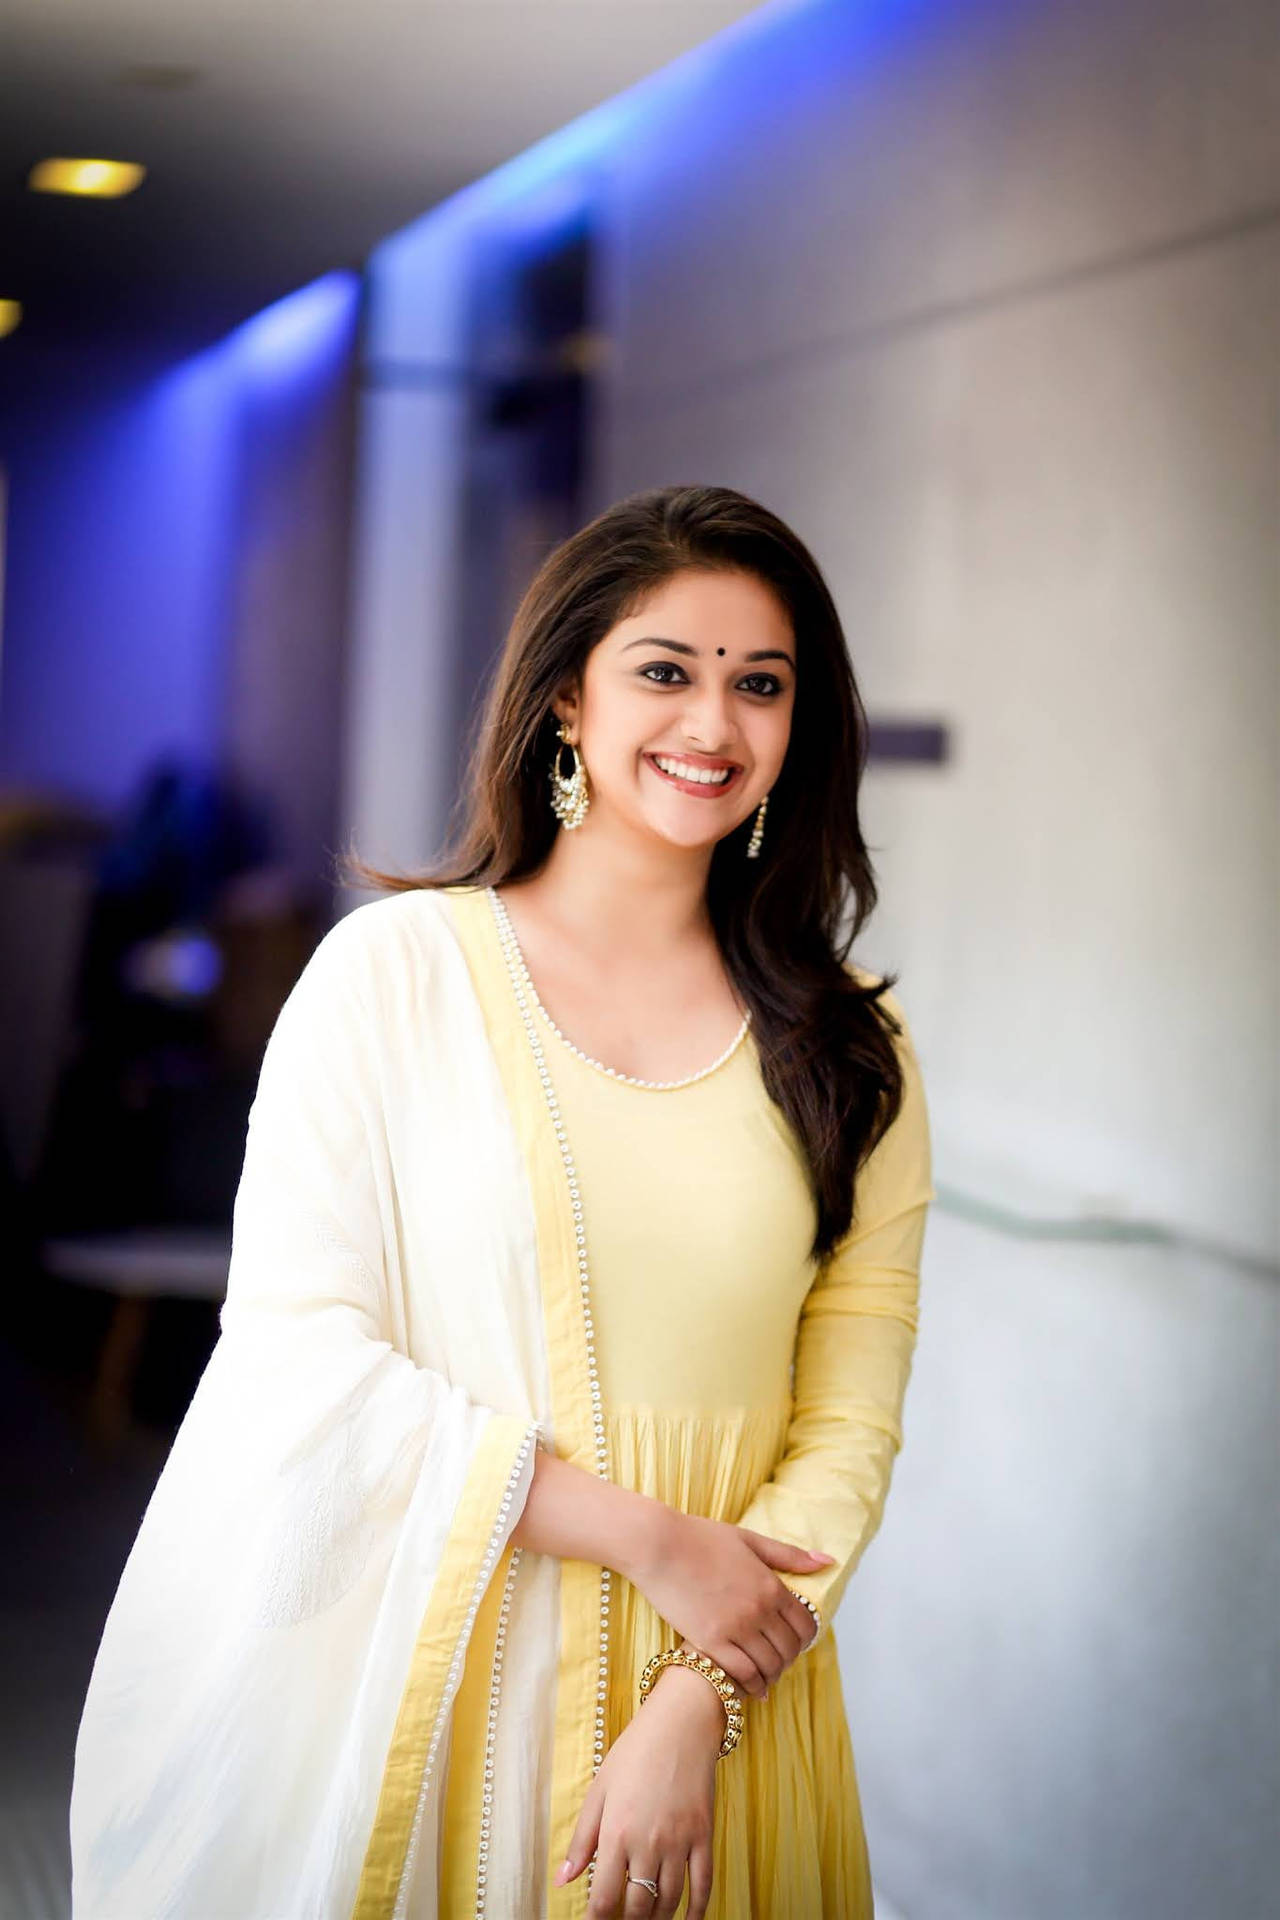 Keerthi Suresh In A Yellow Dress Background